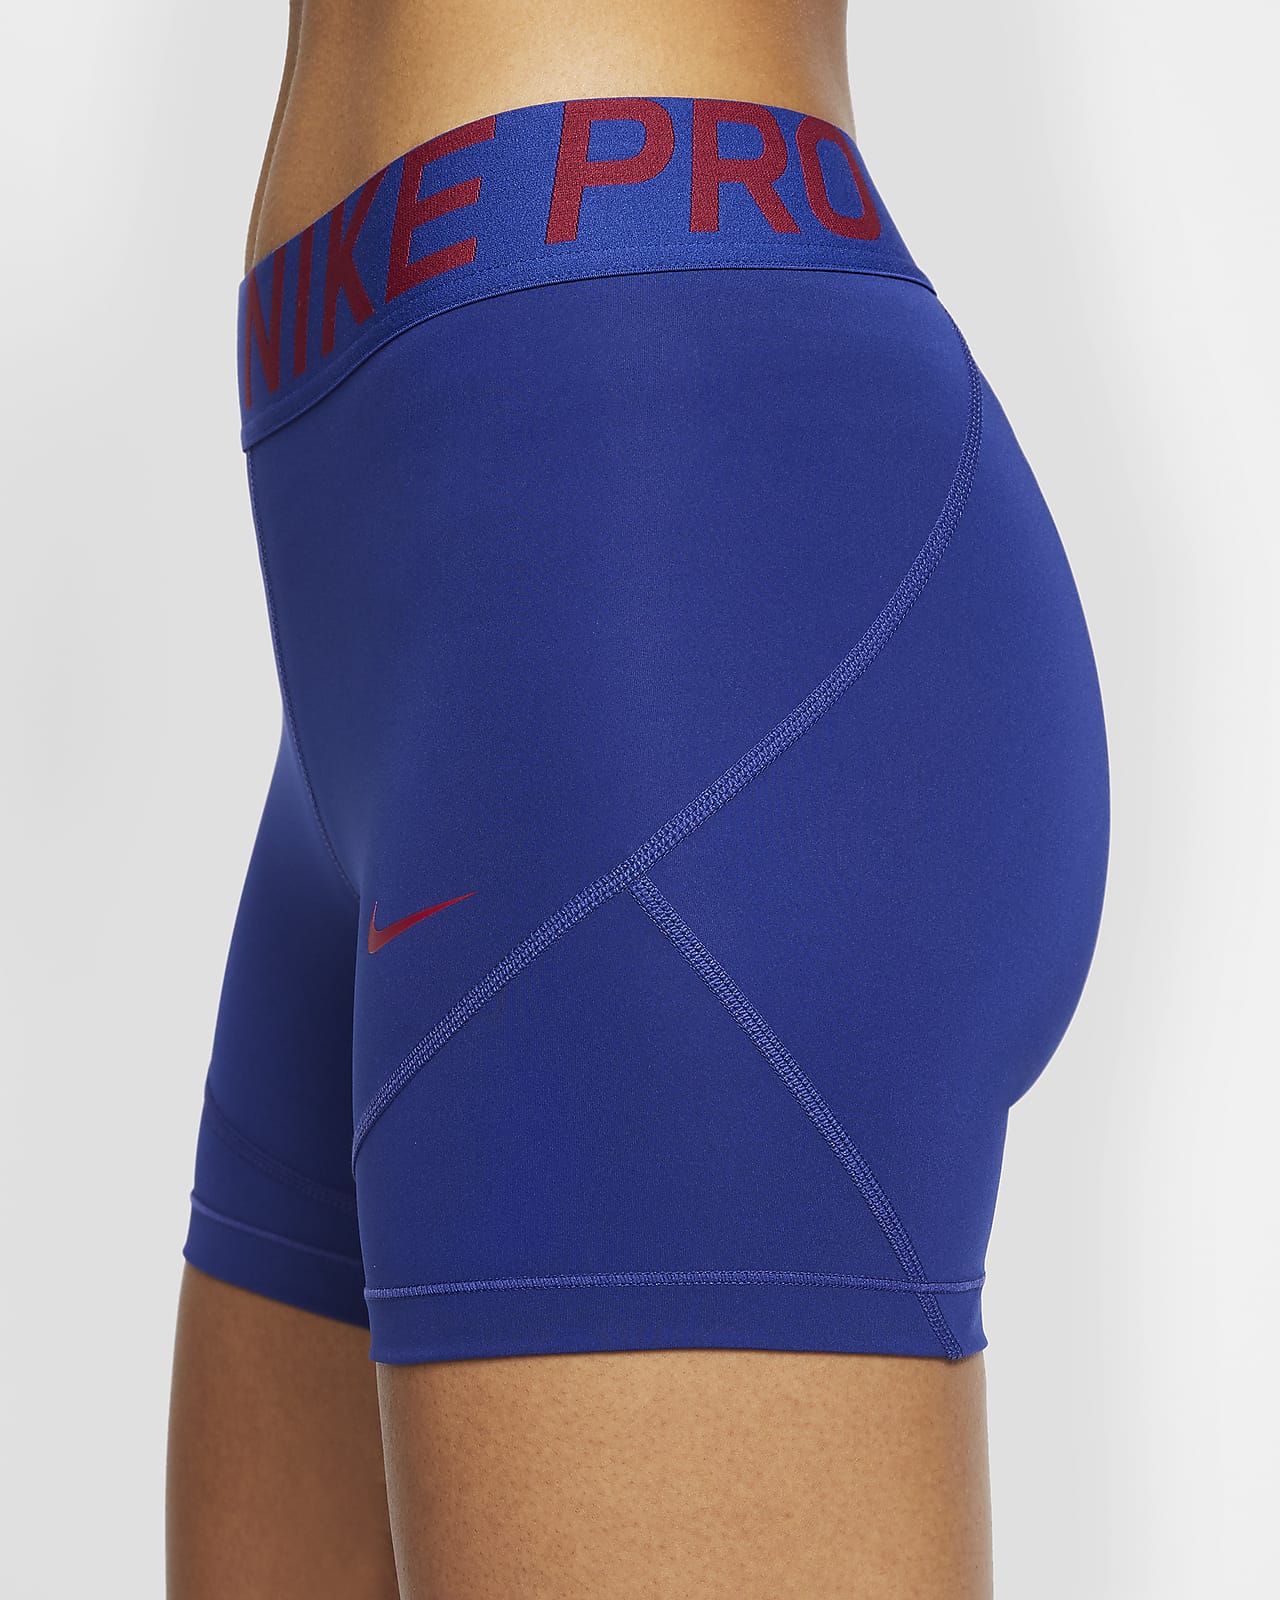 where can you buy nike pro shorts